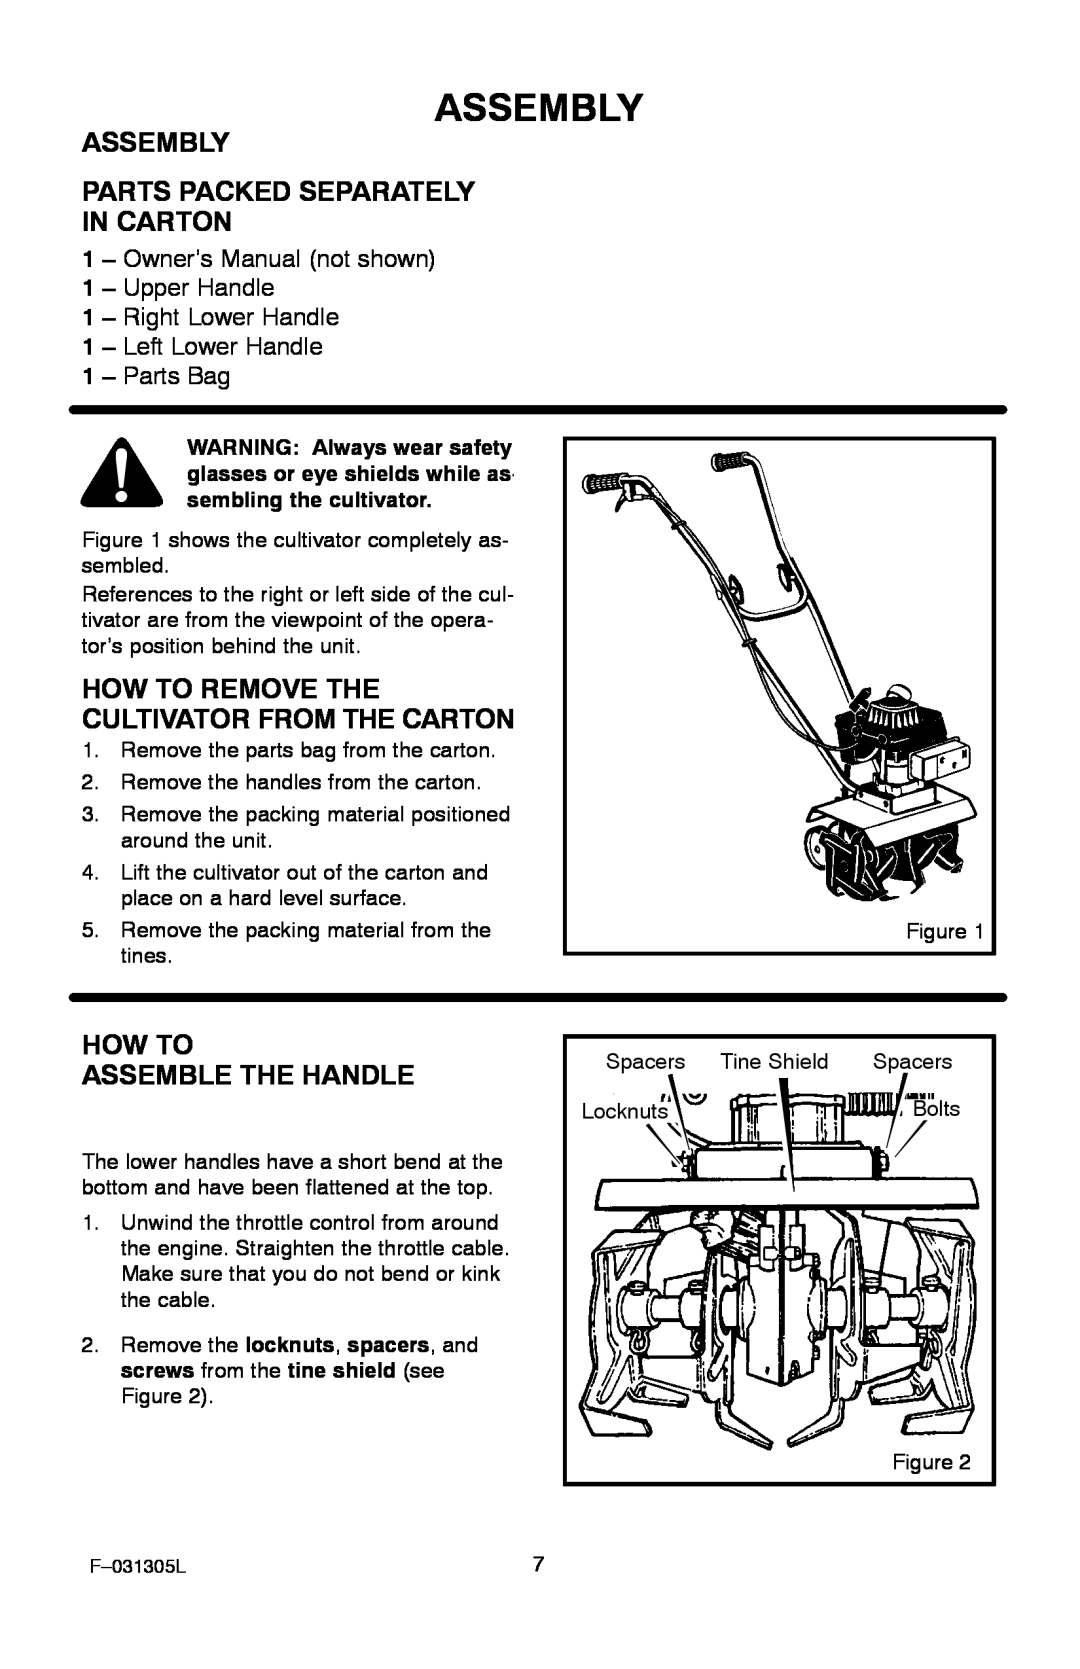 Murray 11052x92D manual Assembly, Parts Packed Separately In Carton, How To Remove The Cultivator From The Carton 